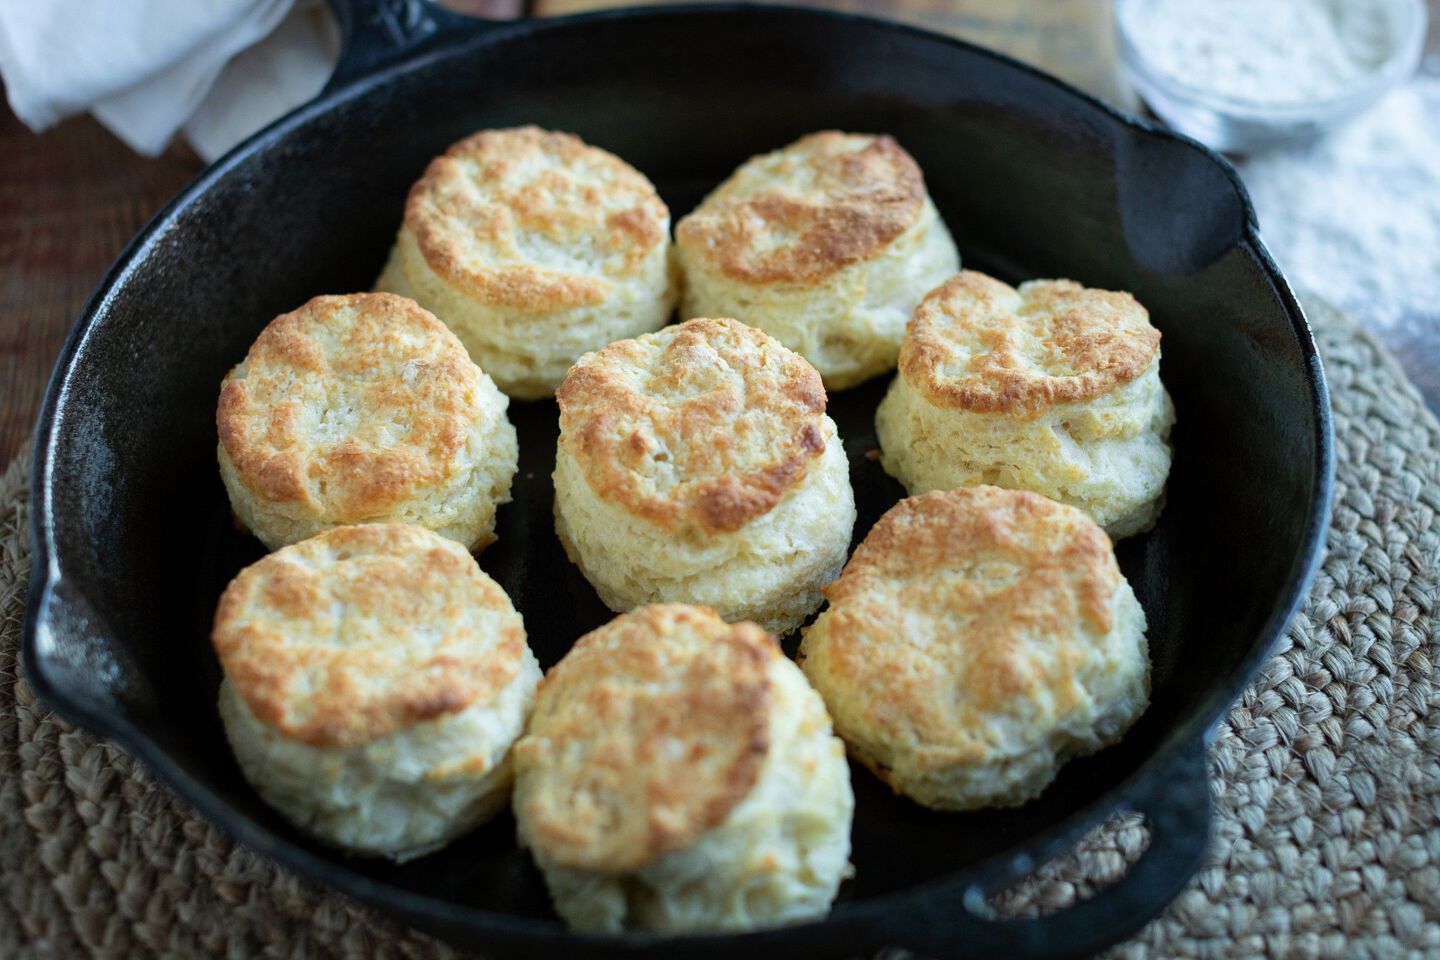 Country Butter Biscuits
